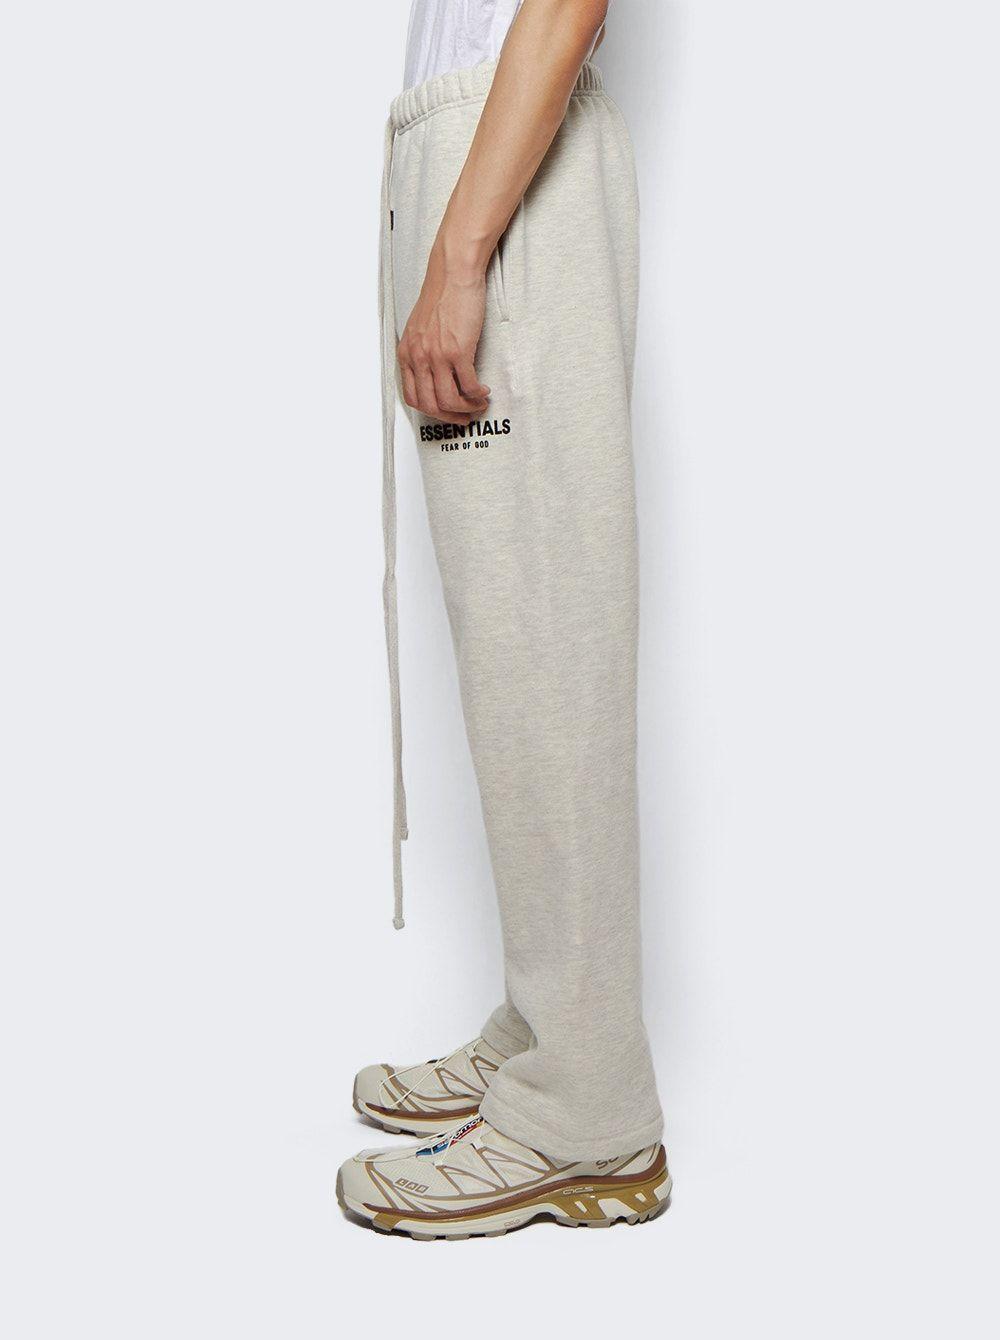 Fear of God ESSENTIALS Relaxed Sweatpants in White for Men | Lyst